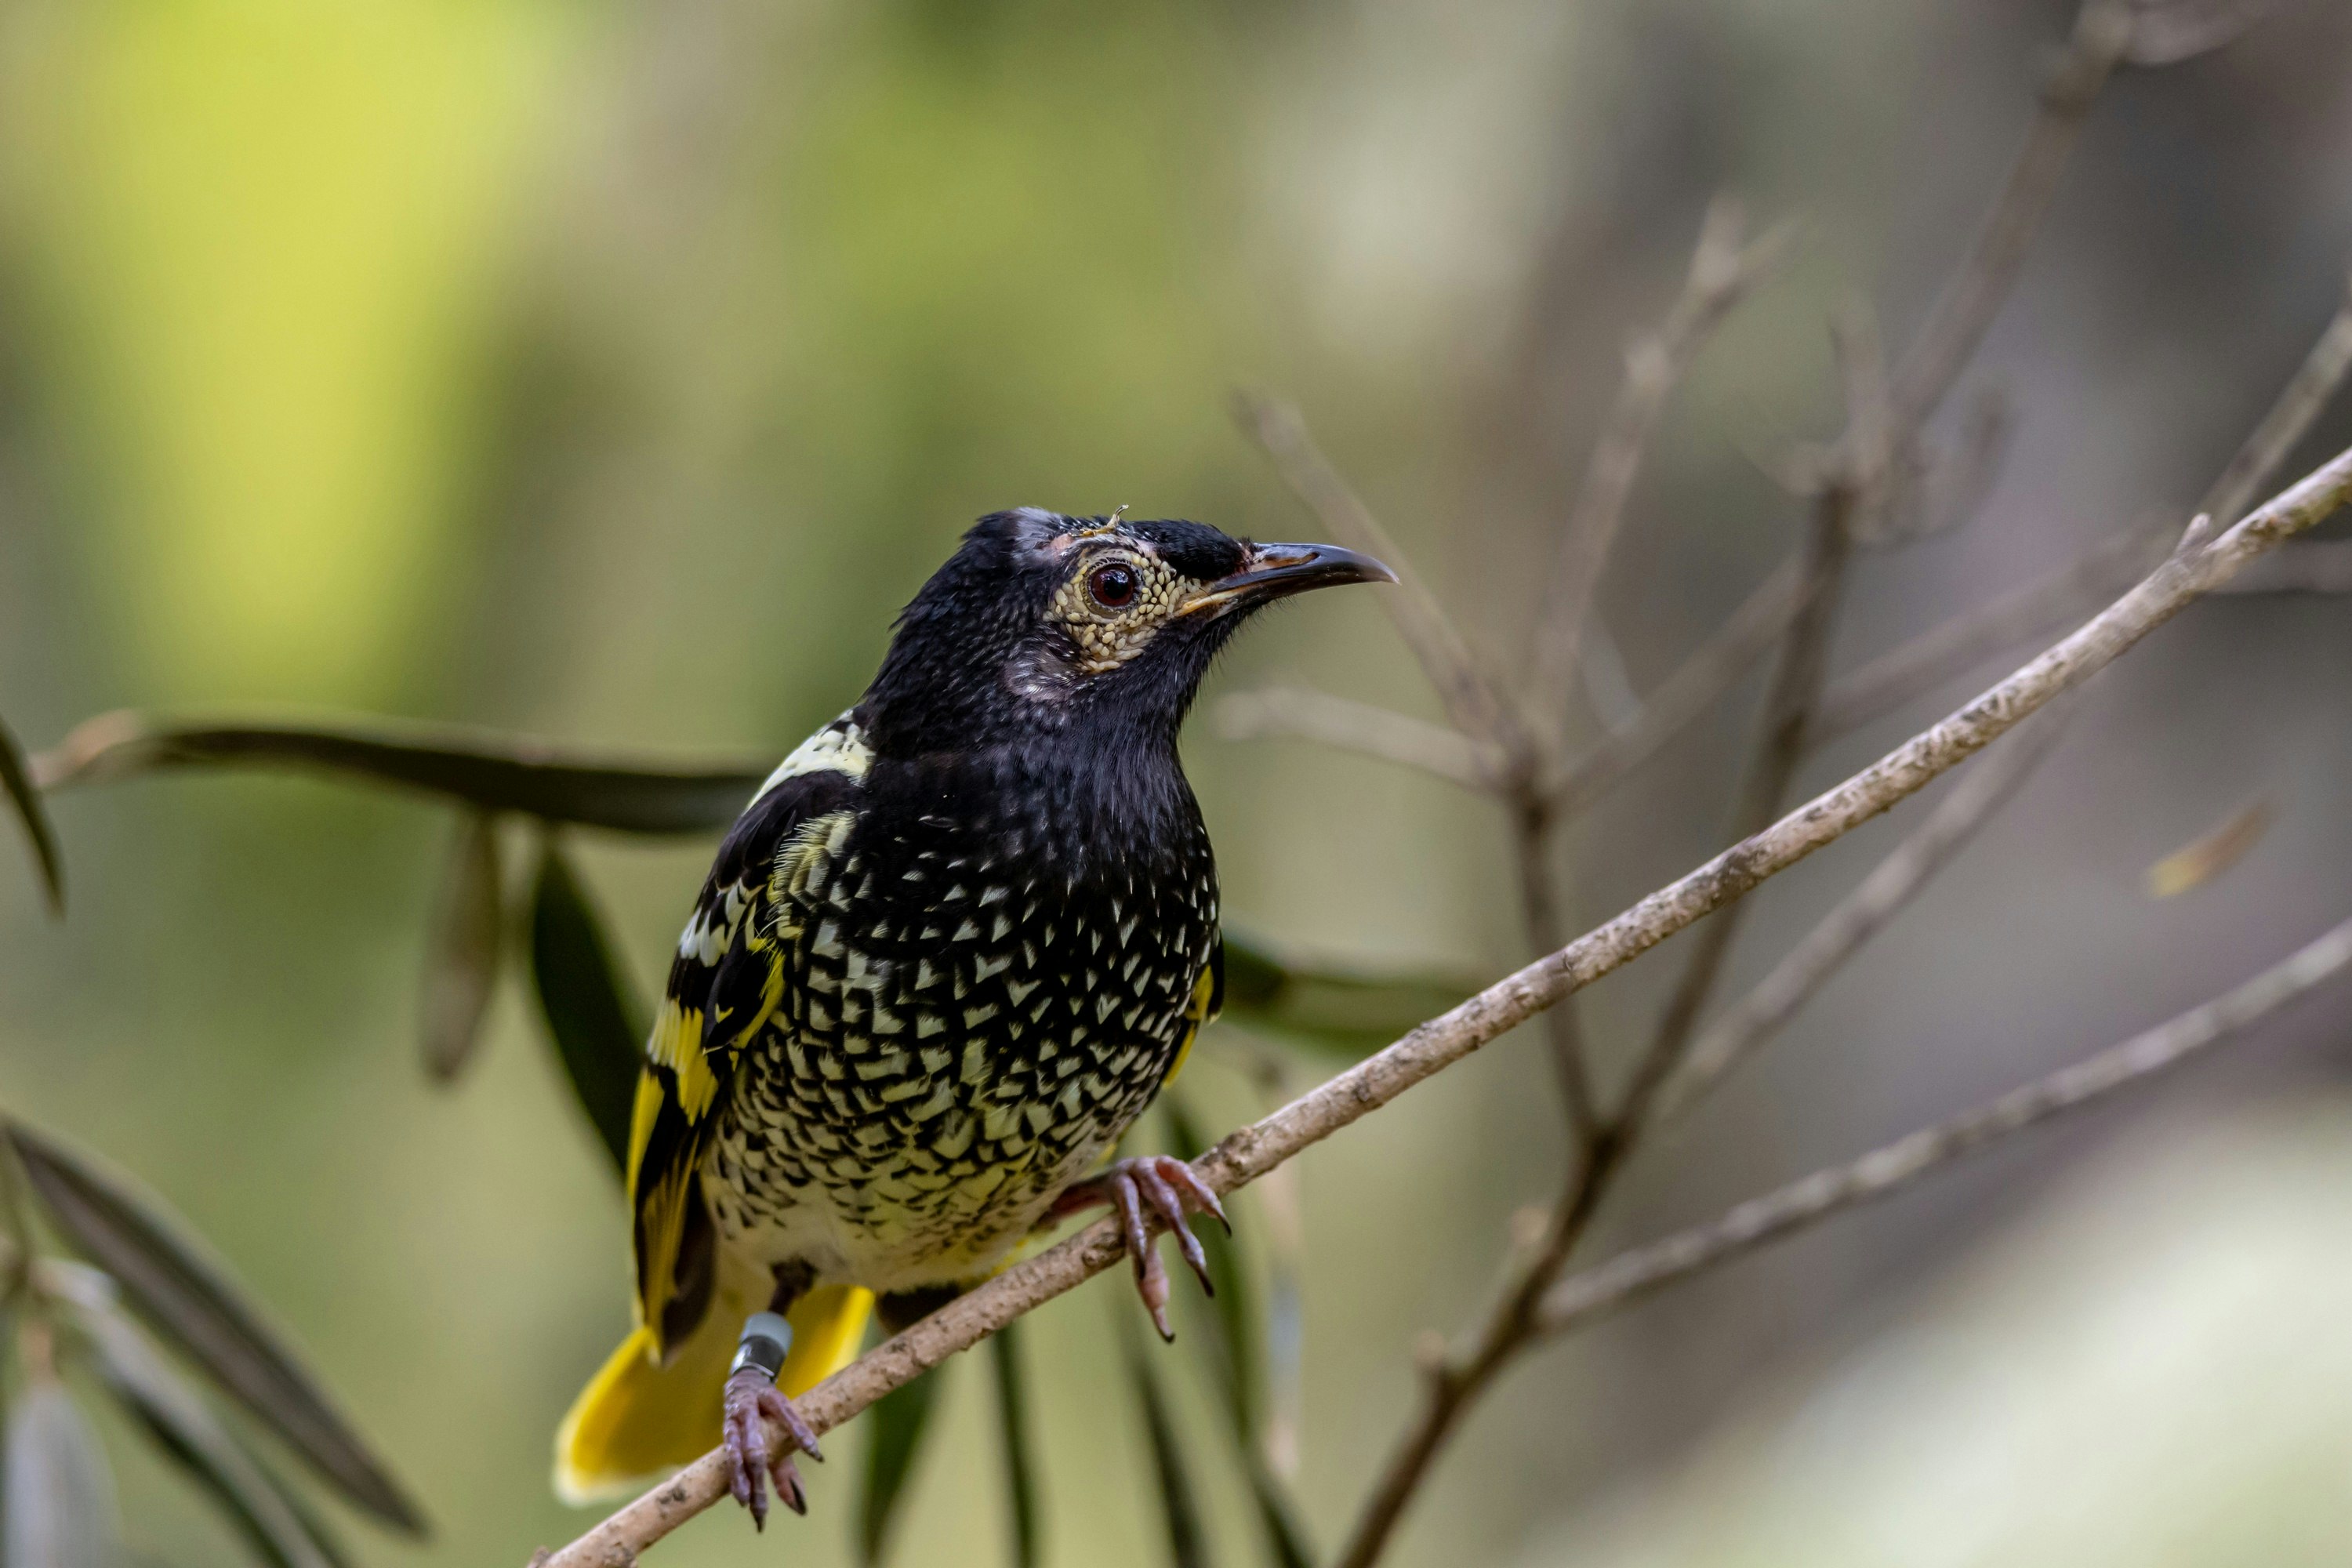 A Regent honeyeater, a passerine songbird native to Australia. It has black and white speckling on its body, a yellow tail, and yellow splotches on its face